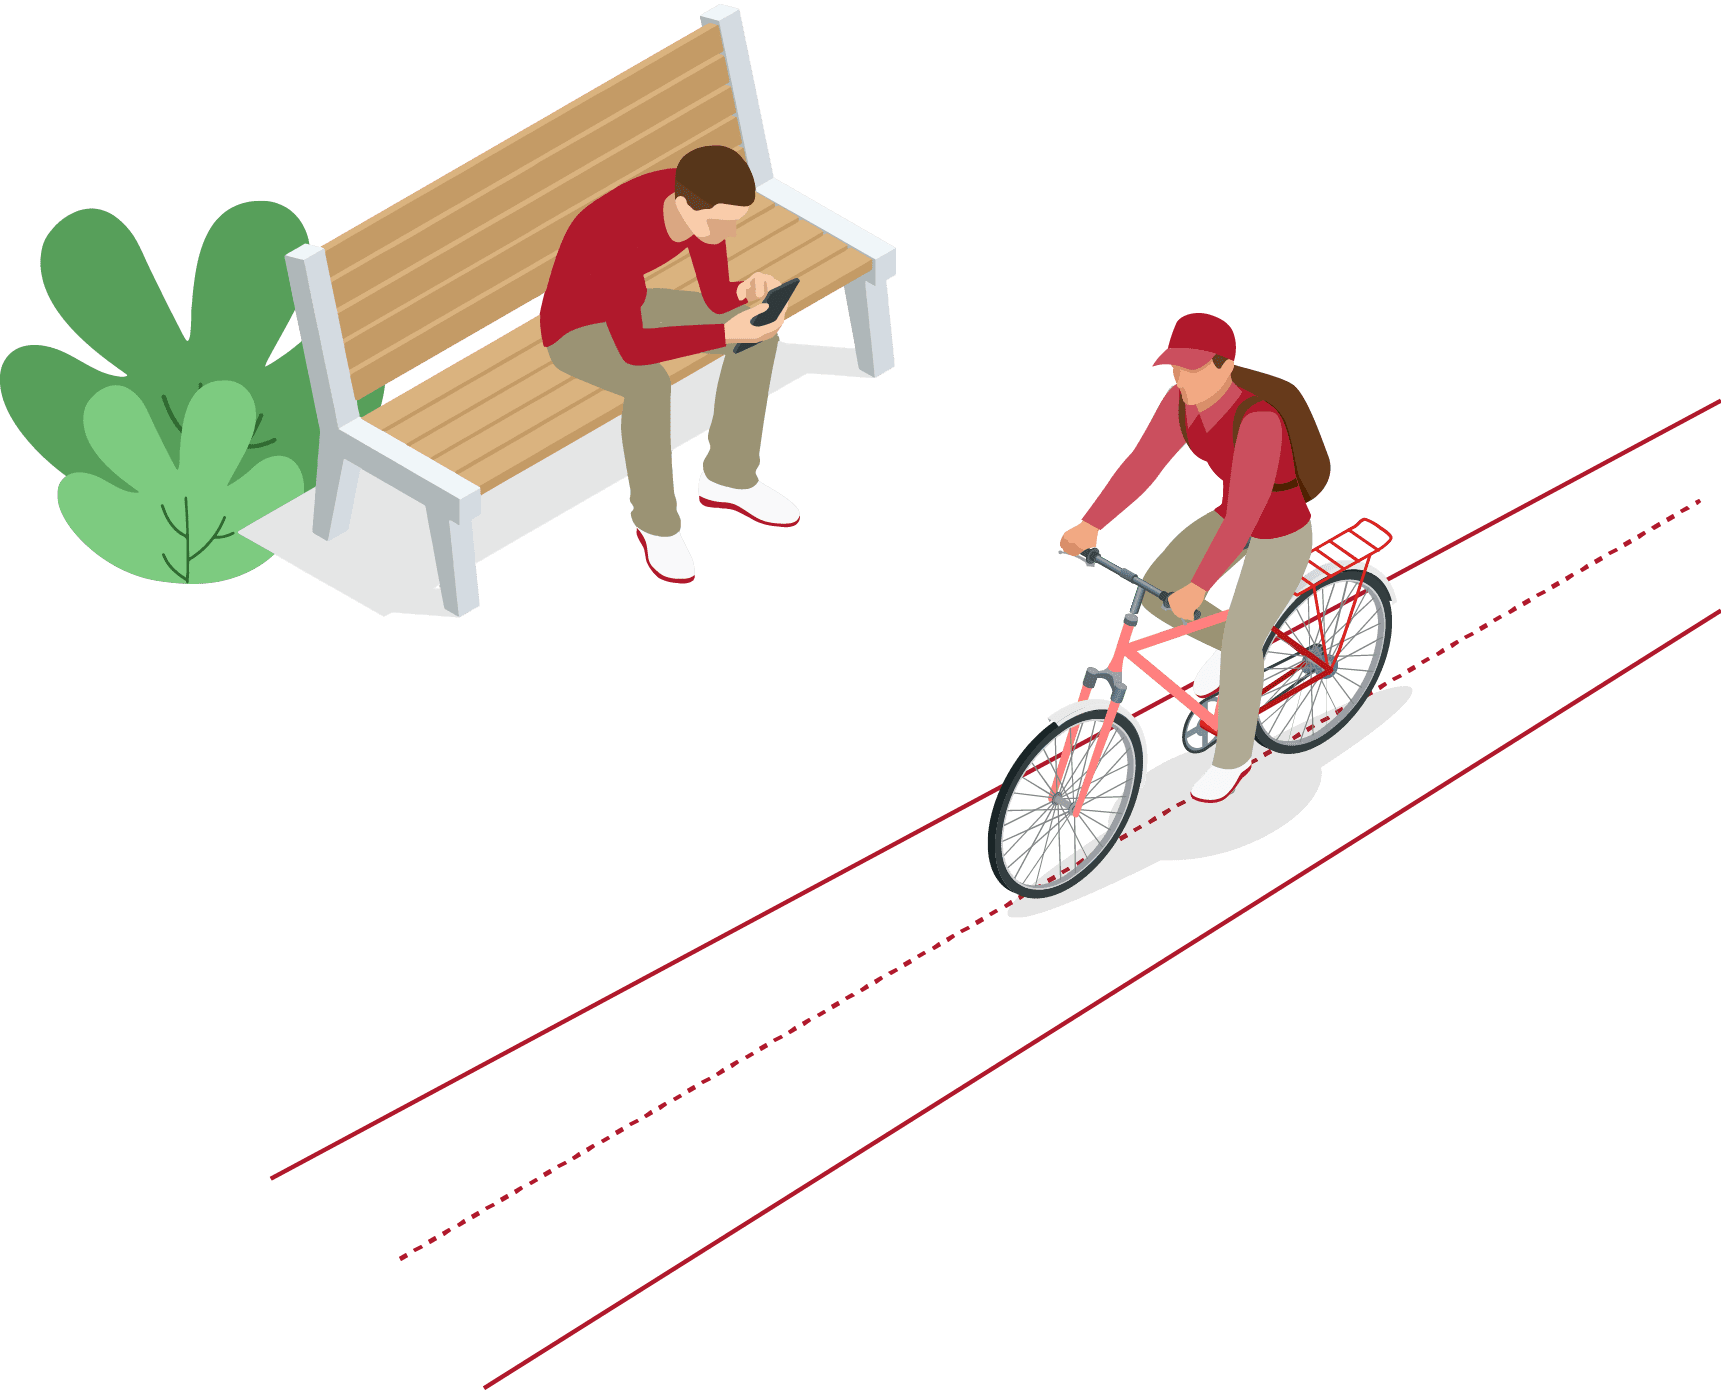 Man on bike and man on bench